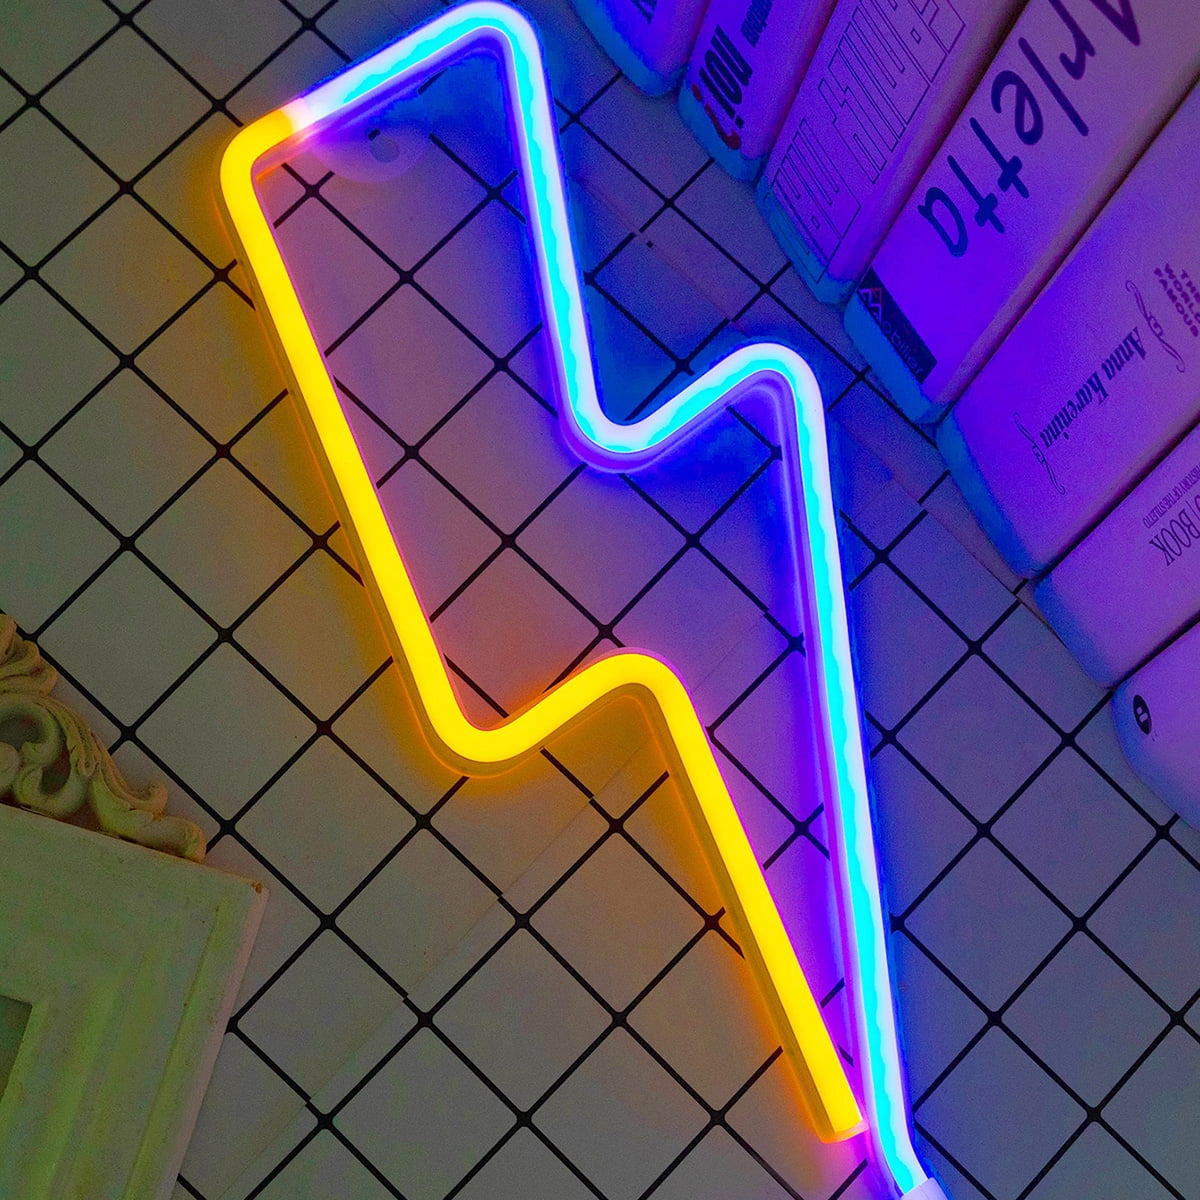 LED Yellow Blue Lightning Bolt Neon Acrylic Battery or USB with On/Off Switch Night Lights Signs Wall Hanging Vibes for Bedroom Gaming Room Setup Christmas Decorations - Walmart.com